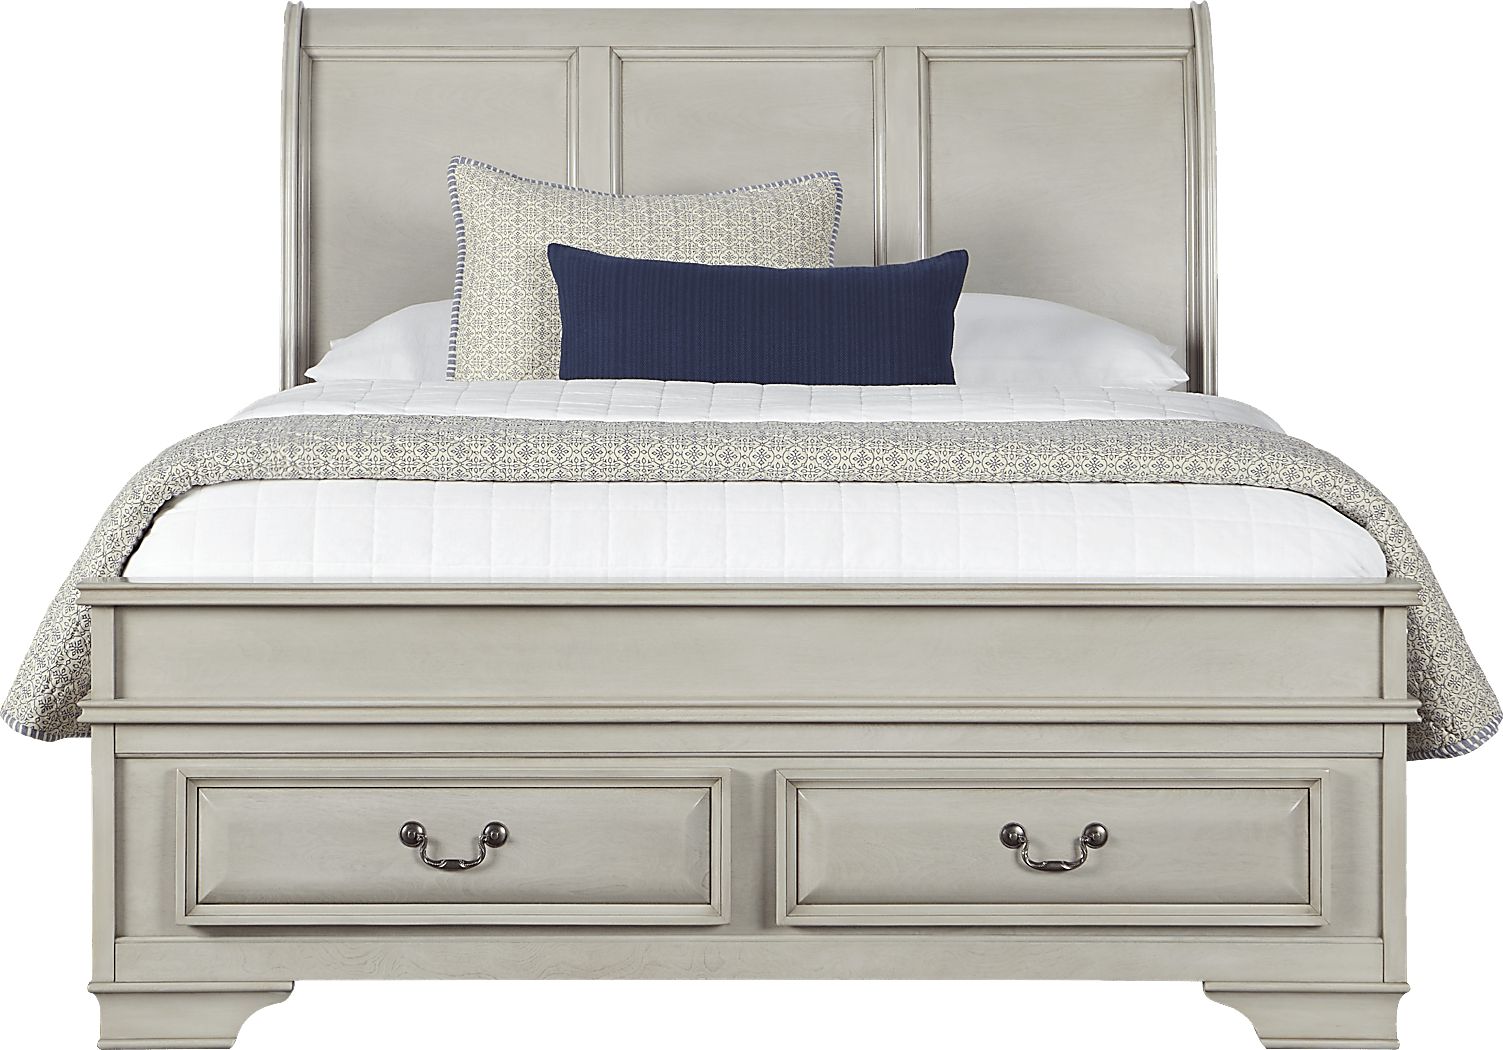 Mill Valley II White 7 Pc Queen Sleigh Bedroom with Storage